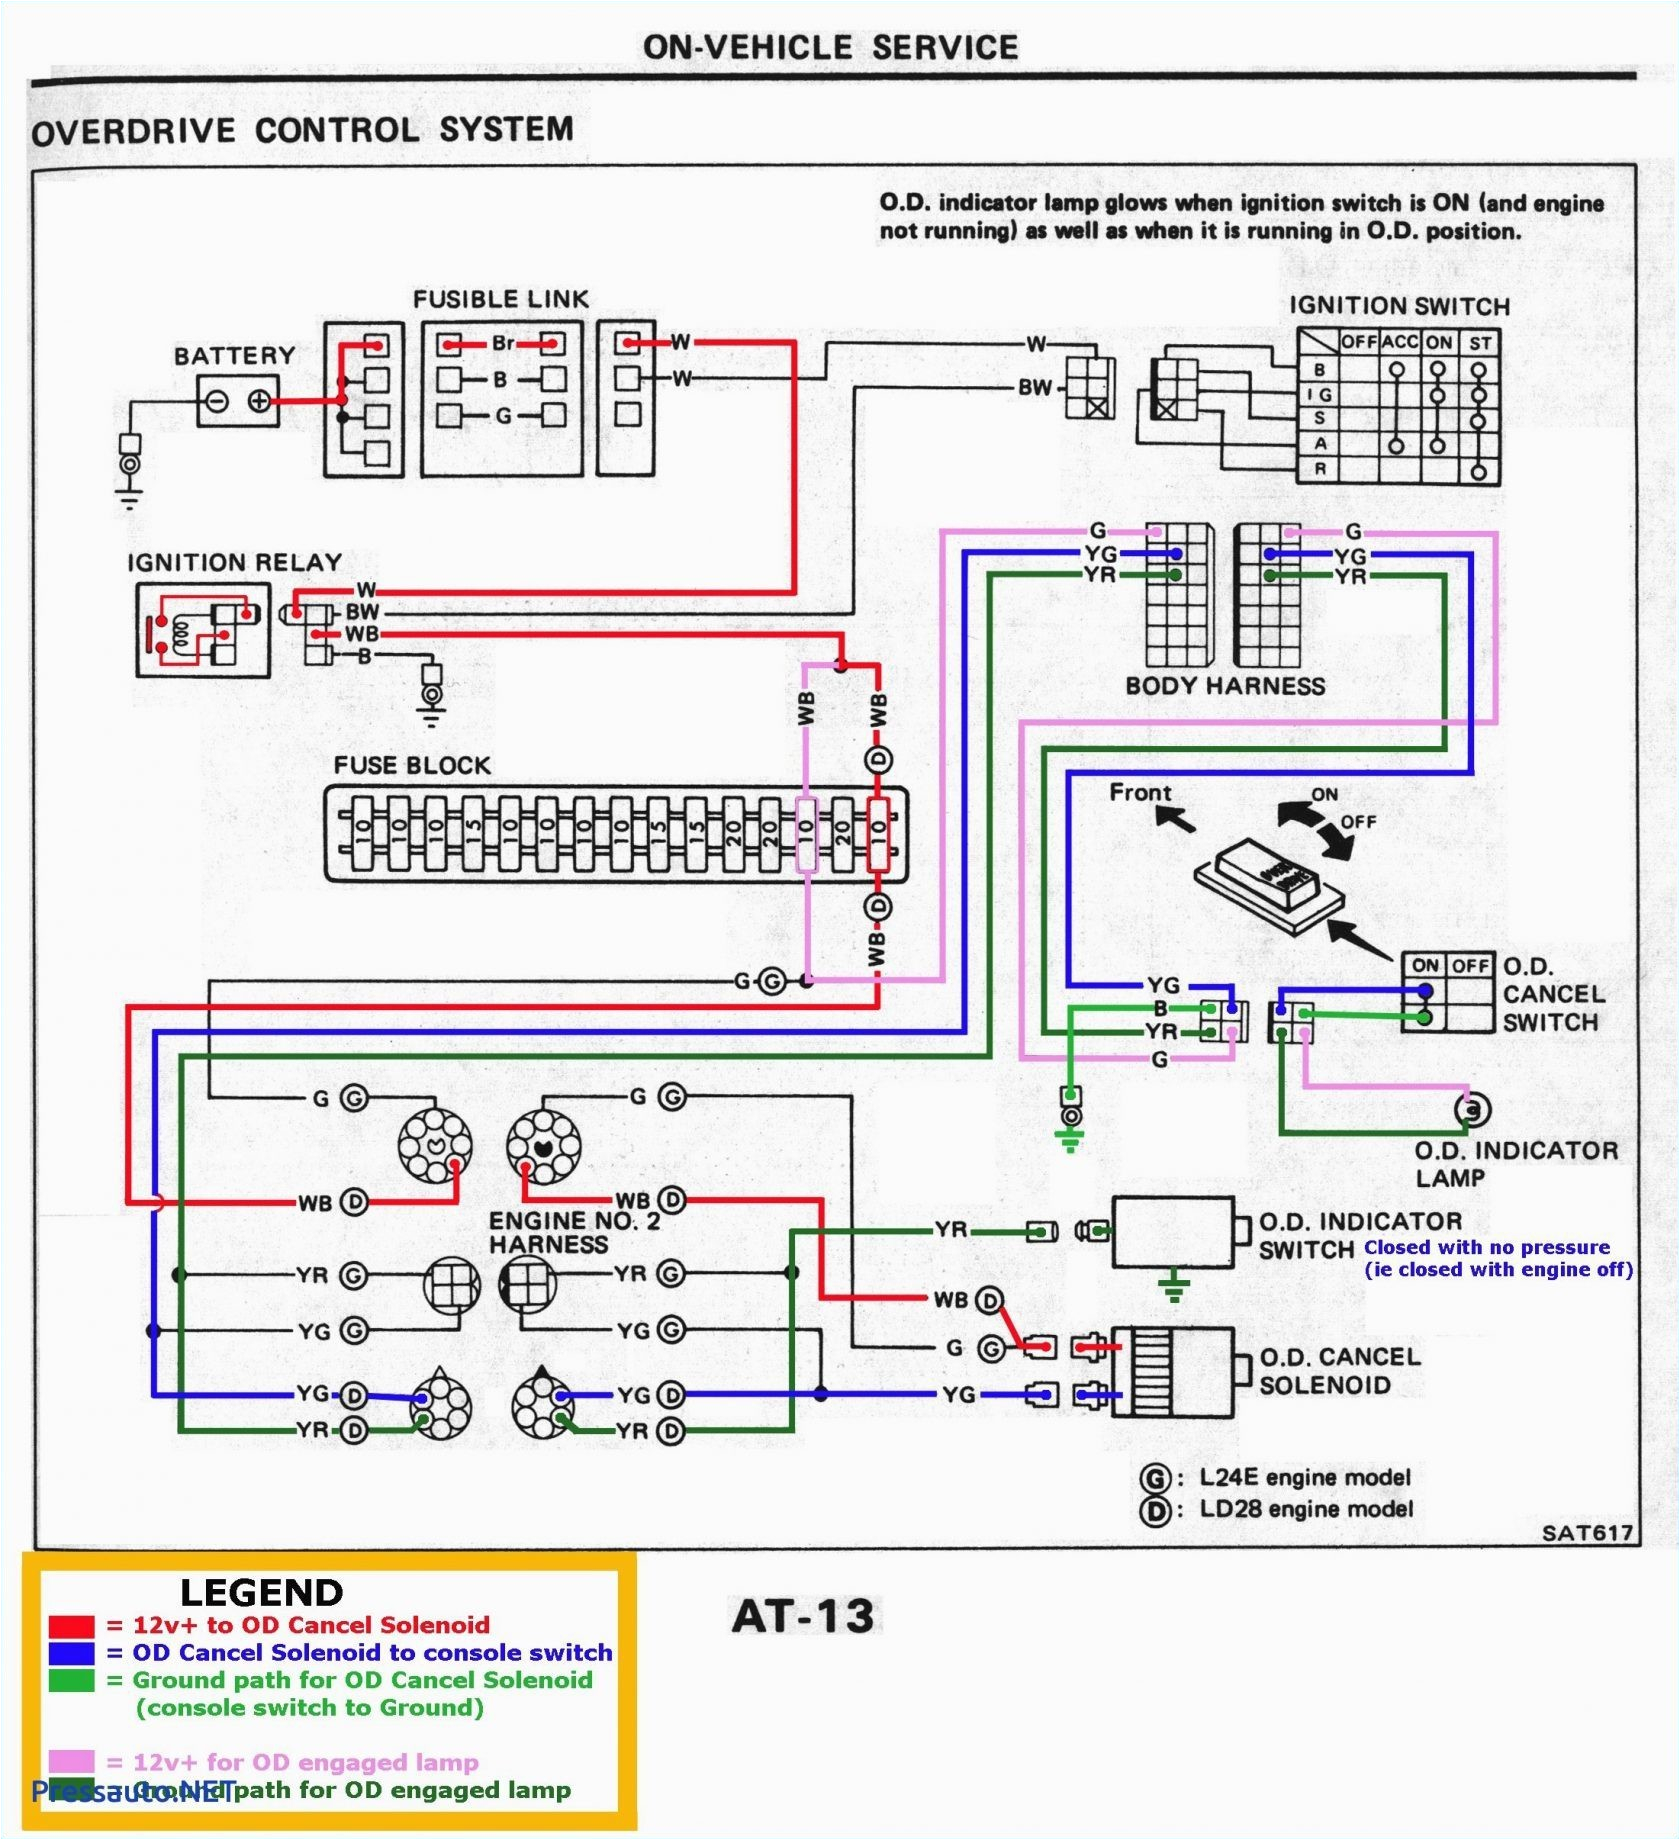 1985 ford Radio Wiring Diagram 94 ford F 350 Stereo Wiring Harness Manual E Book